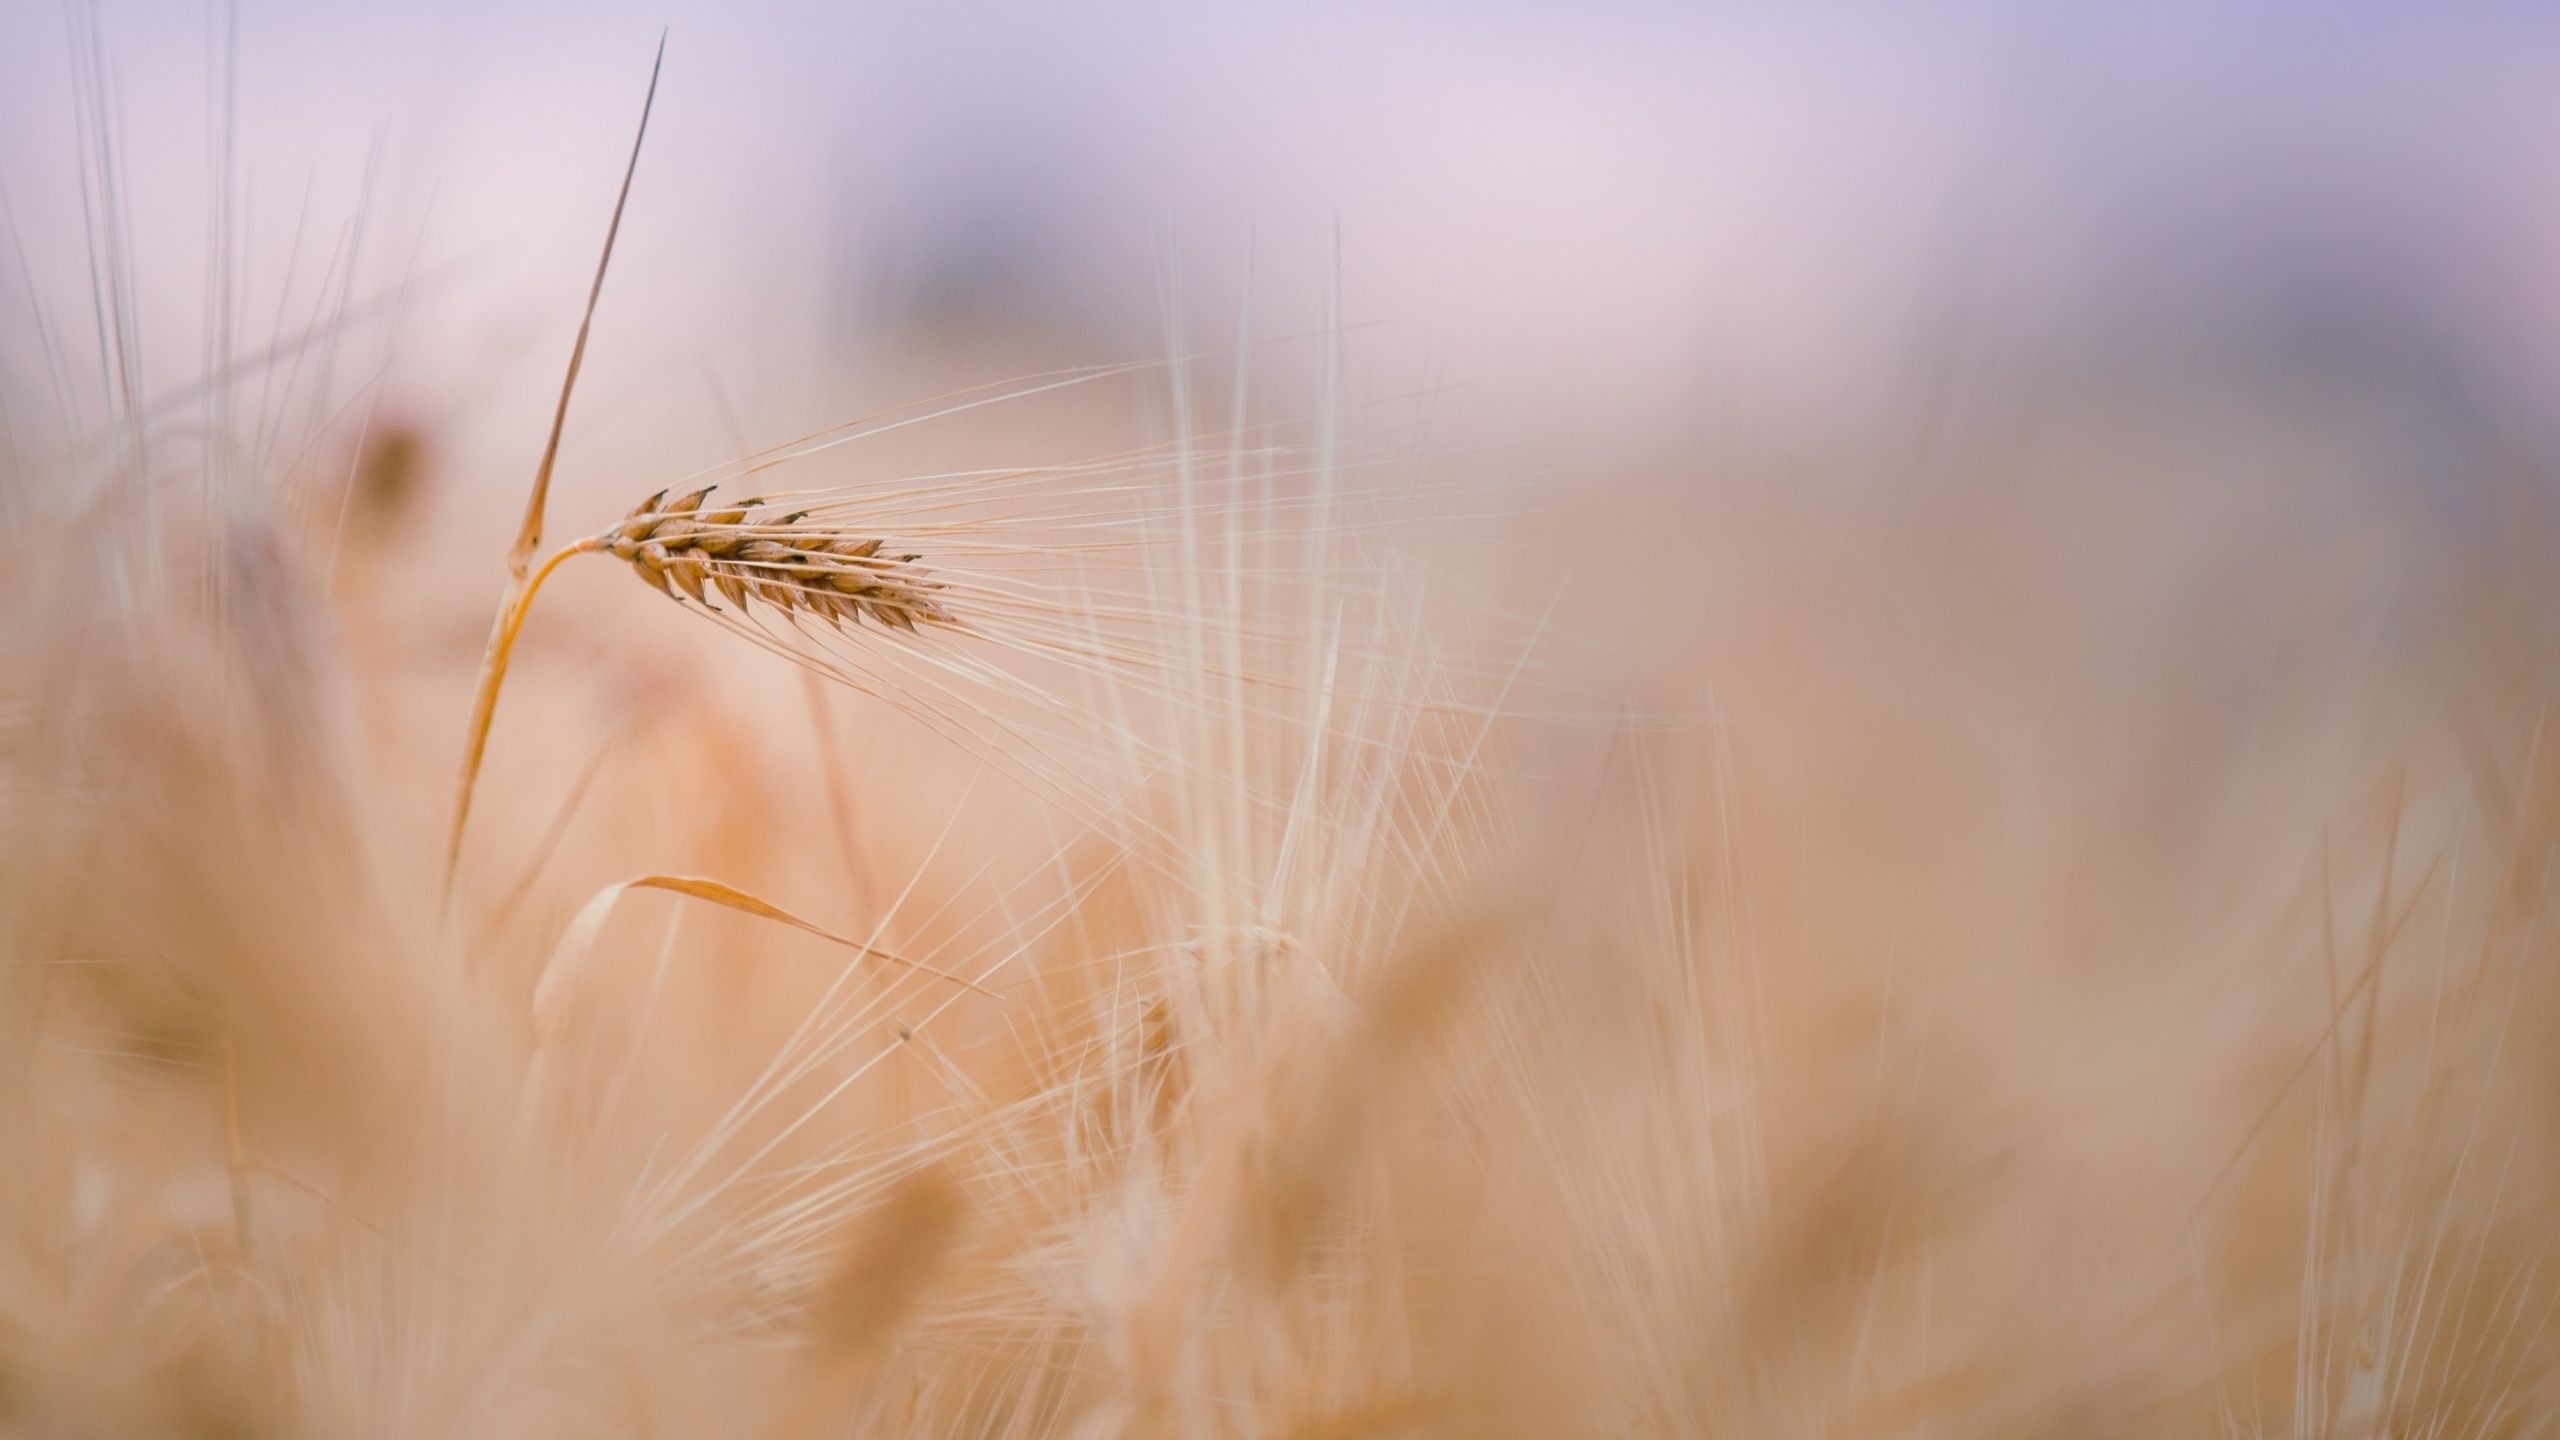 Wheat 4K wallpaper for your desktop or mobile screen free and easy to download